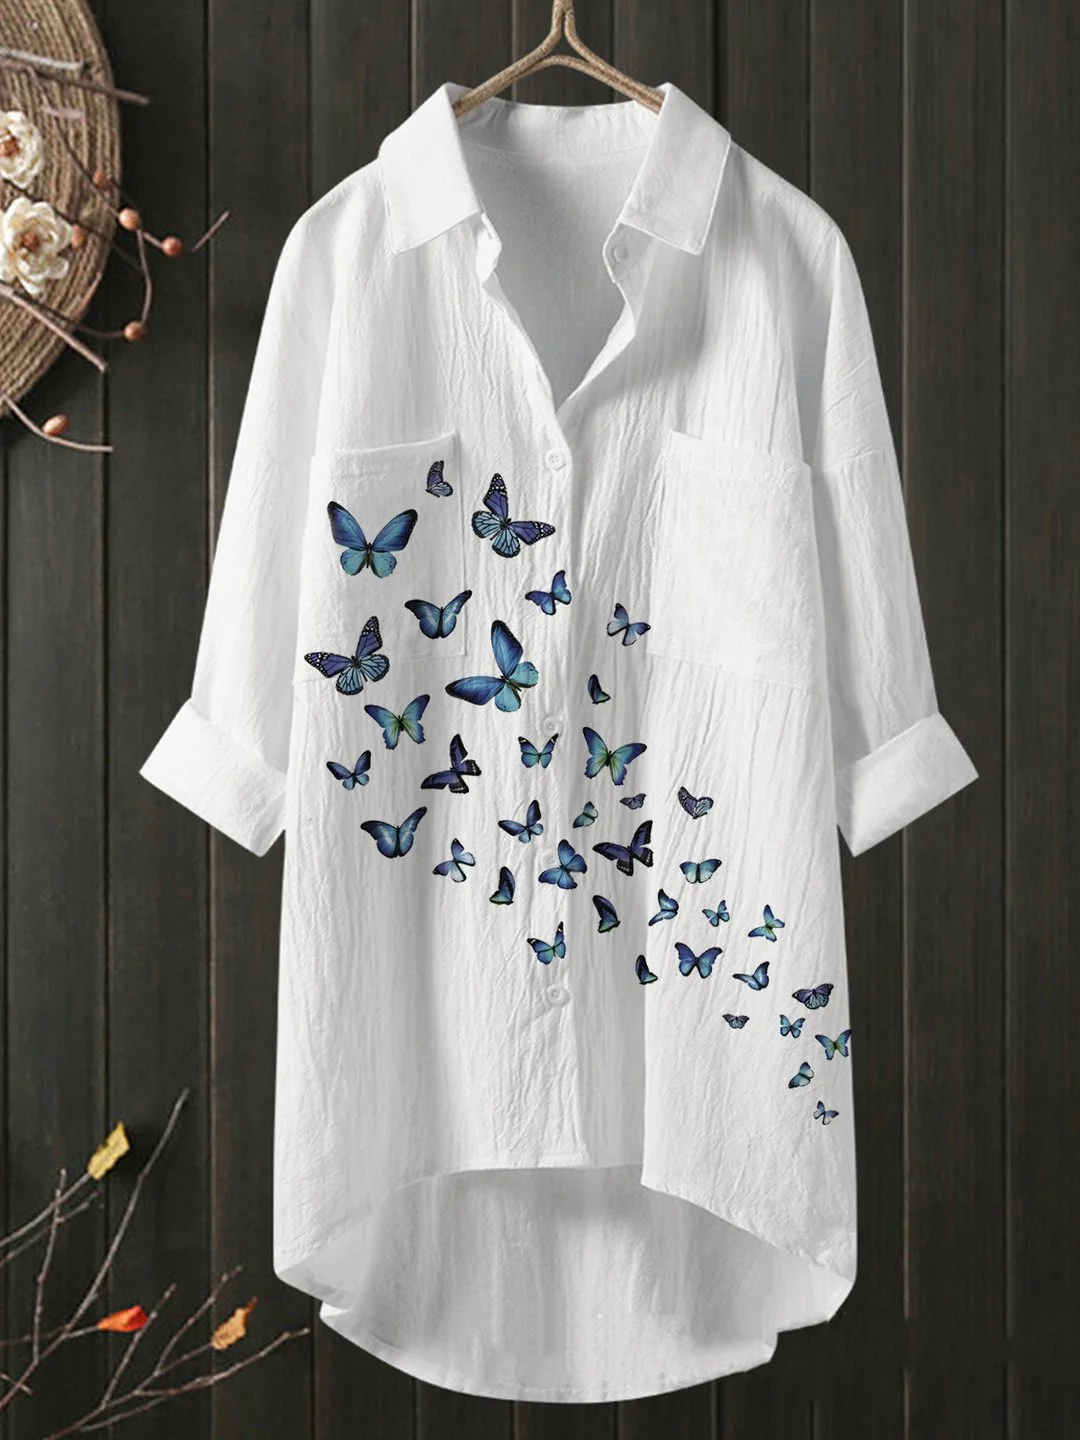 Ladies Butterfly Print Casual Temperament Shirt And Top